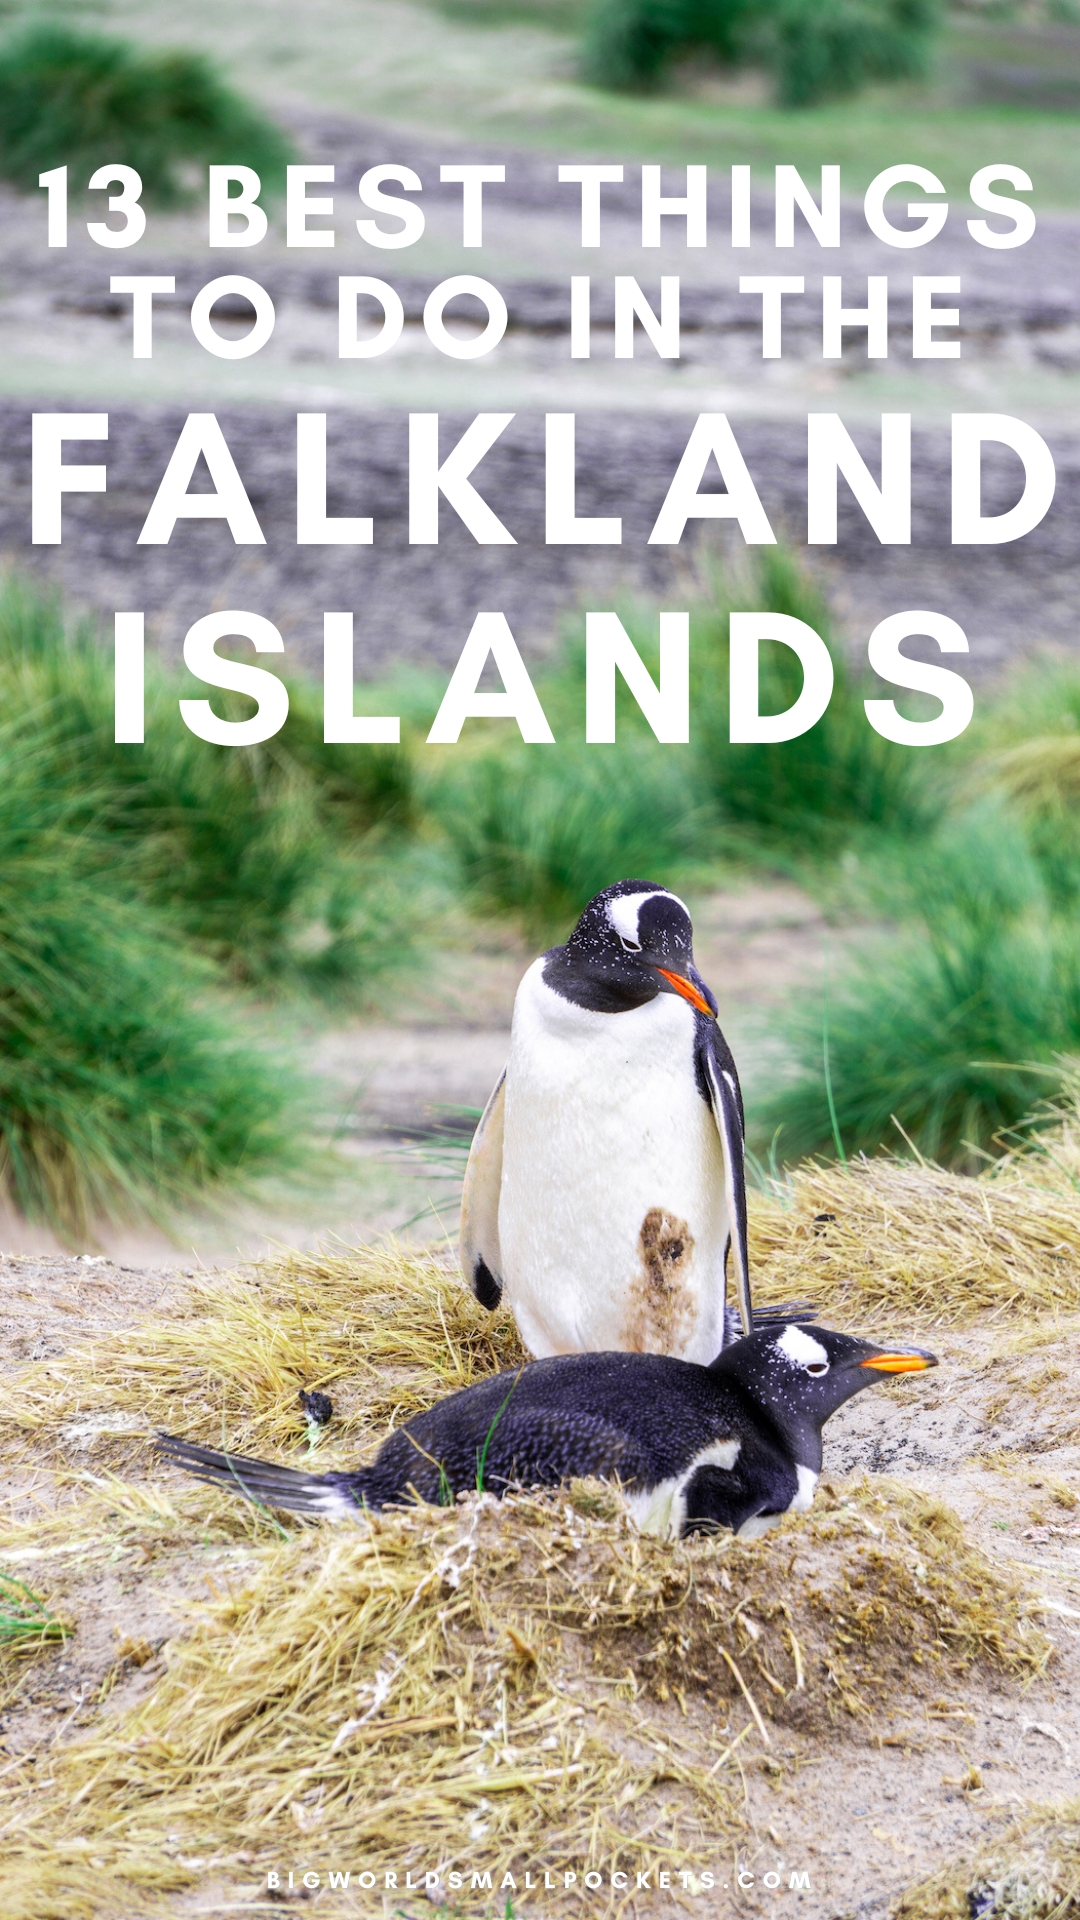 13 Best Things to Do in the Falklands Islands